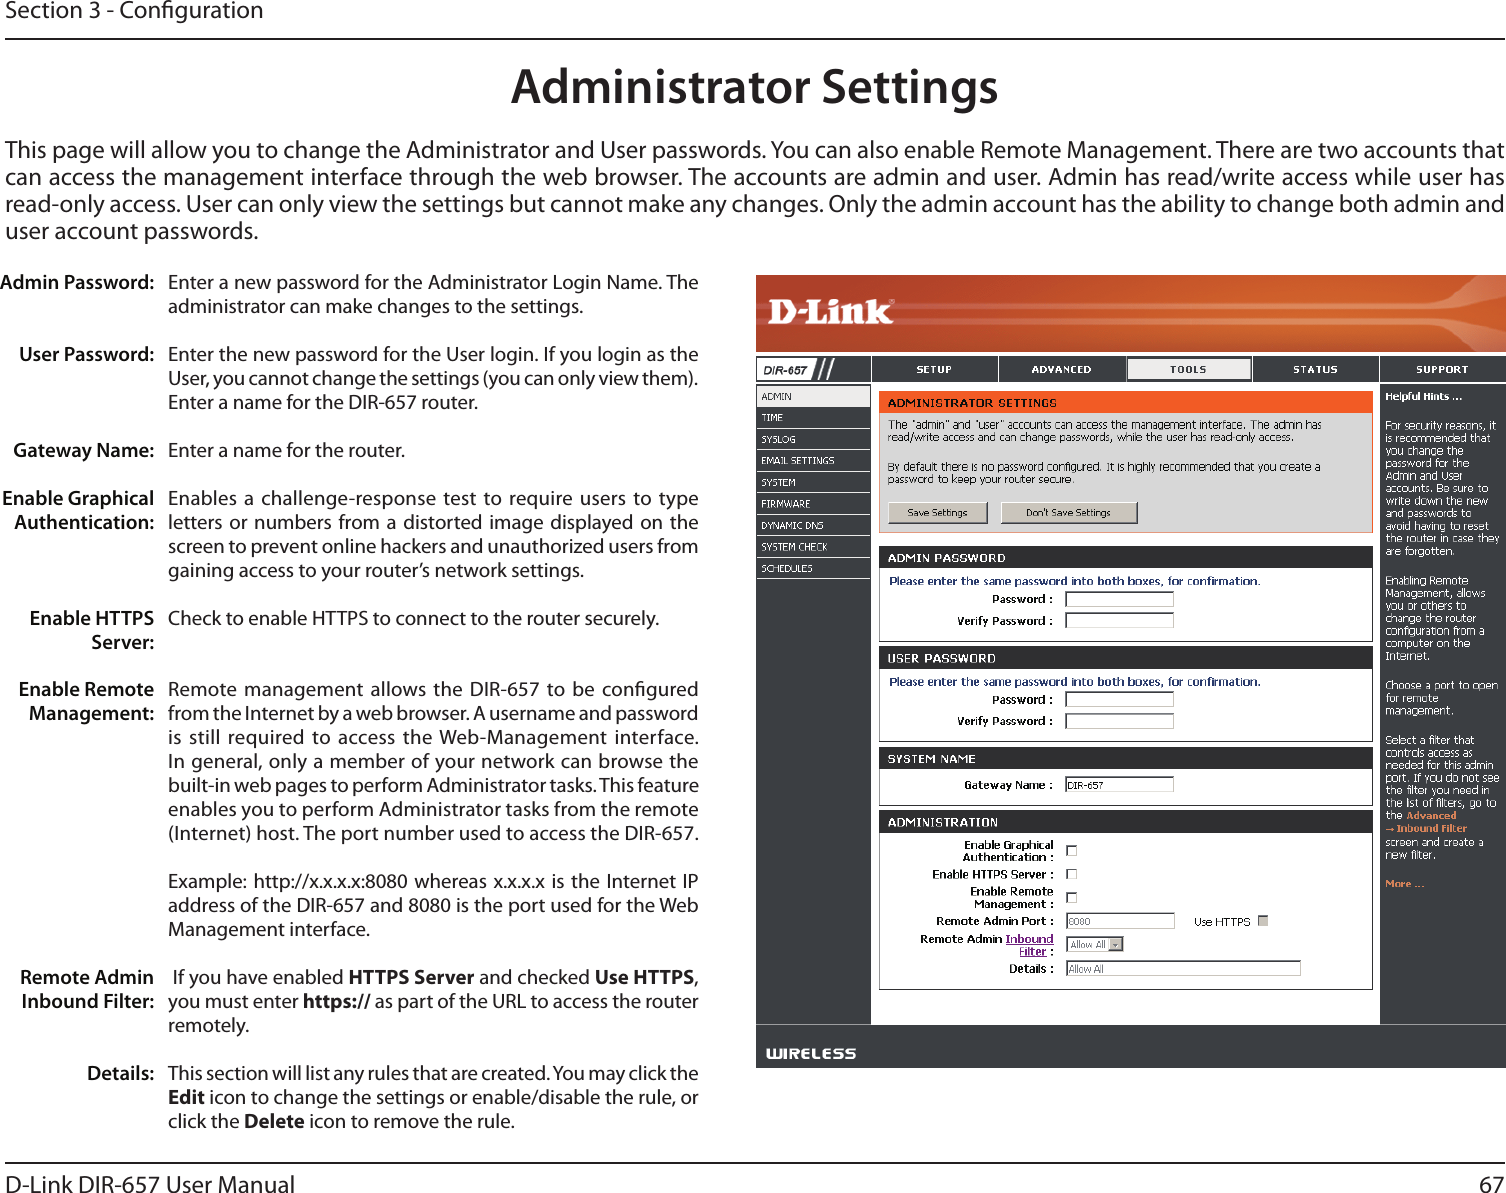 67D-Link DIR-657 User ManualSection 3 - CongurationAdministrator SettingsThis page will allow you to change the Administrator and User passwords. You can also enable Remote Management. There are two accounts that can access the management interface through the web browser. The accounts are admin and user. Admin has read/write access while user has read-only access. User can only view the settings but cannot make any changes. Only the admin account has the ability to change both admin and user account passwords.Enter a new password for the Administrator Login Name. The administrator can make changes to the settings.Enter the new password for the User login. If you login as the User, you cannot change the settings (you can only view them).Enter a name for the DIR-657 router.Enter a name for the router.Enables a challenge-response test to  require users  to type letters or  numbers from a  distorted image  displayed on  the screen to prevent online hackers and unauthorized users from gaining access to your router’s network settings.Check to enable HTTPS to connect to the router securely.Remote management allows the DIR-657  to be congured from the Internet by a web browser. A username and password is still required to access the Web-Management interface. In general, only a member of your network can browse the built-in web pages to perform Administrator tasks. This feature enables you to perform Administrator tasks from the remote (Internet) host. The port number used to access the DIR-657.Example: http://x.x.x.x:8080 whereas x.x.x.x is the  Internet IP address of the DIR-657 and 8080 is the port used for the Web Management interface. If you have enabled HTTPS Server and checked Use HTTPS, you must enter https:// as part of the URL to access the router remotely.This section will list any rules that are created. You may click the Edit icon to change the settings or enable/disable the rule, or click the Delete icon to remove the rule.Admin Password:User Password:Gateway Name:Enable Graphical Authentication:Enable HTTPS Server:Enable Remote Management:Remote Admin Inbound Filter:Details: